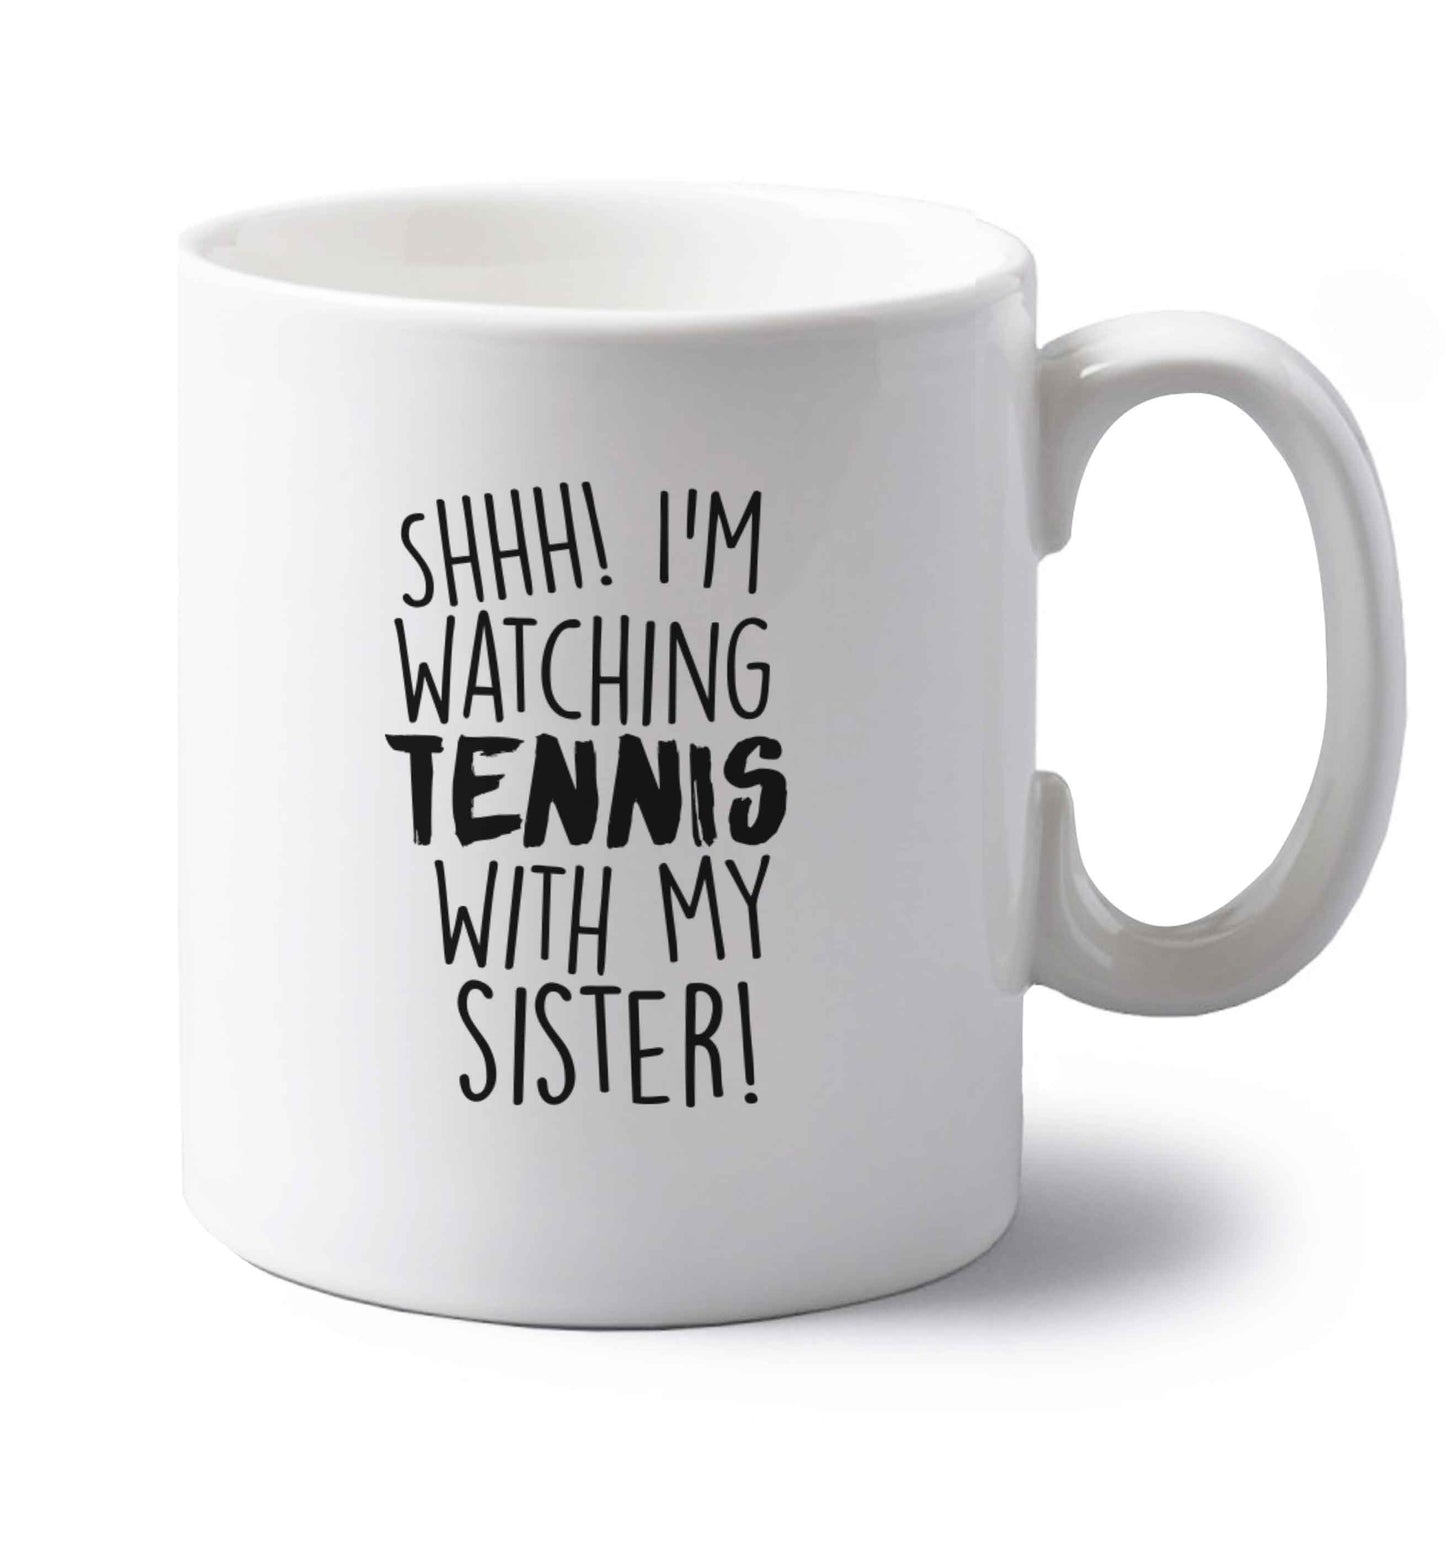 Shh! I'm watching tennis with my sister! left handed white ceramic mug 